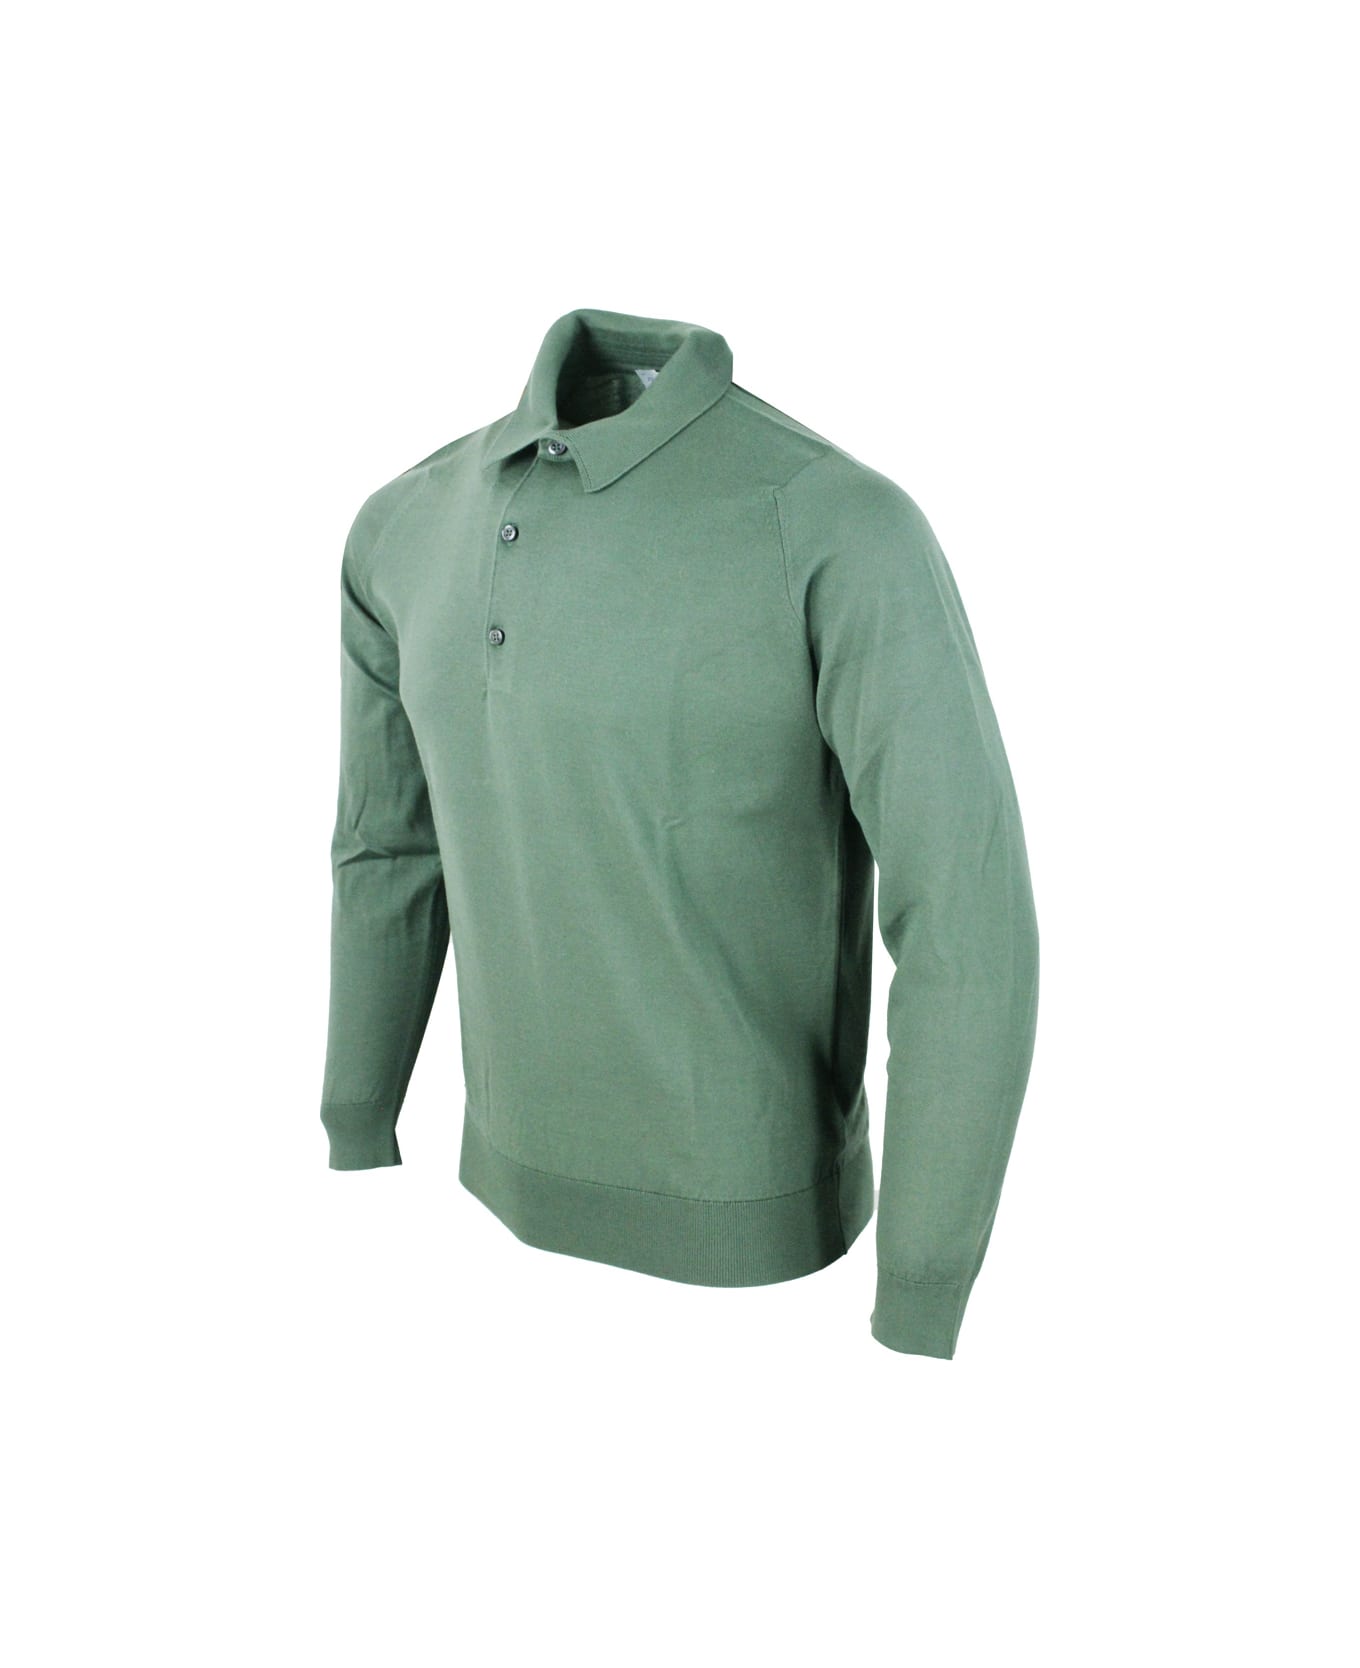 John Smedley Long-sleeved Polo Shirt In Extrafine Cotton Thread With Three Buttons - Green